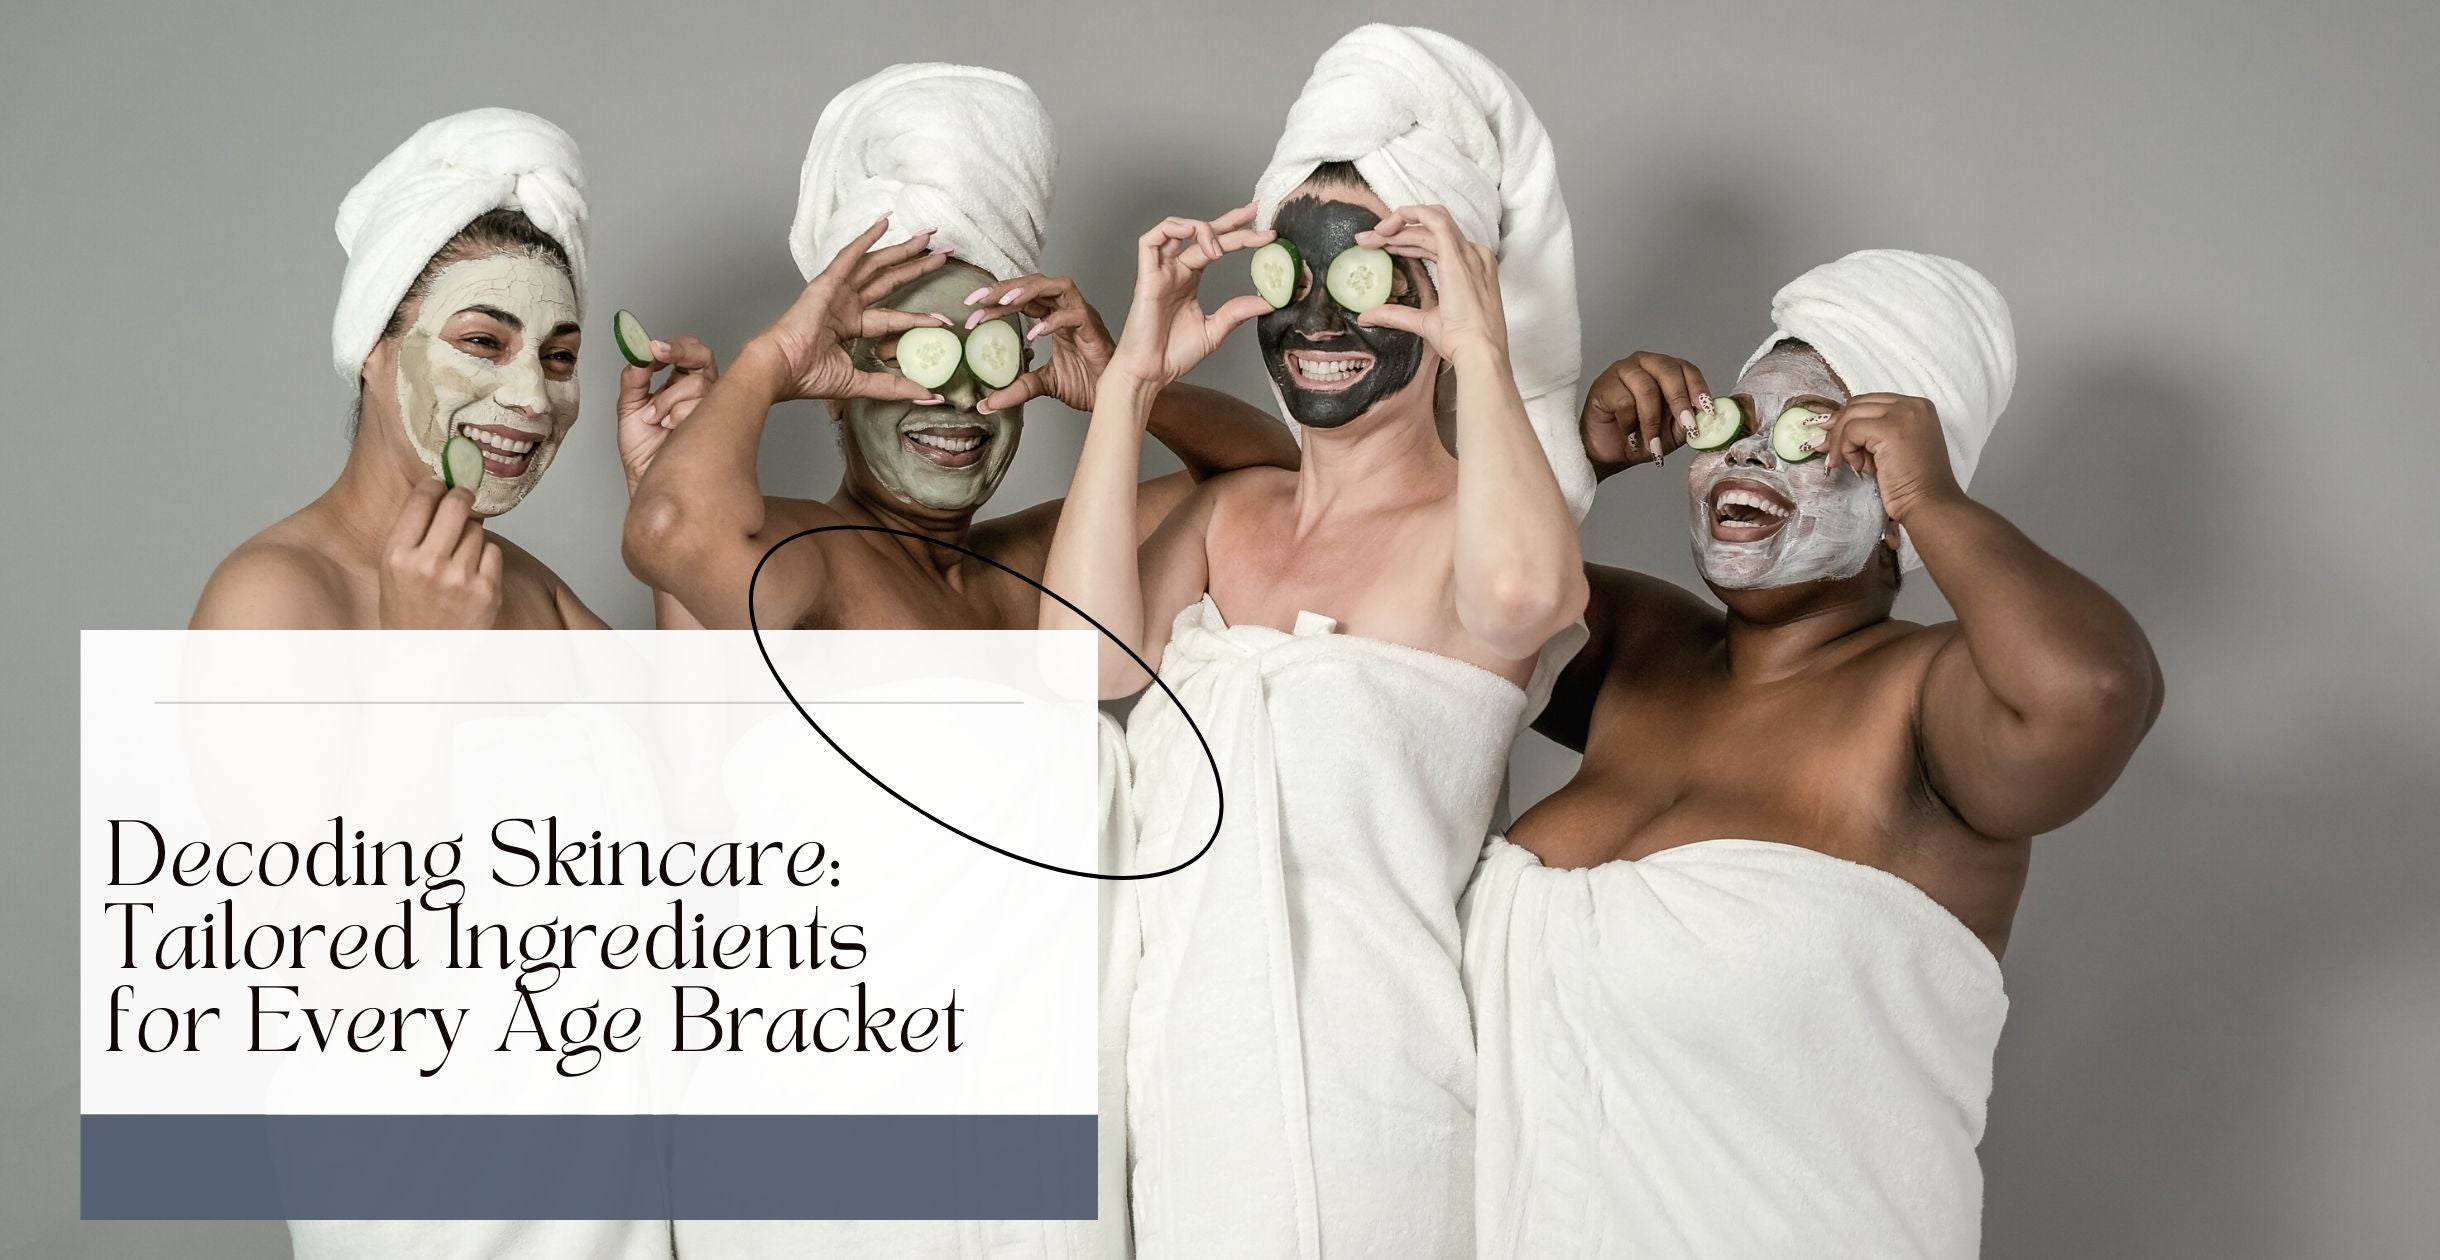 Decoding Skincare: Tailored Ingredients for Every Age Bracket